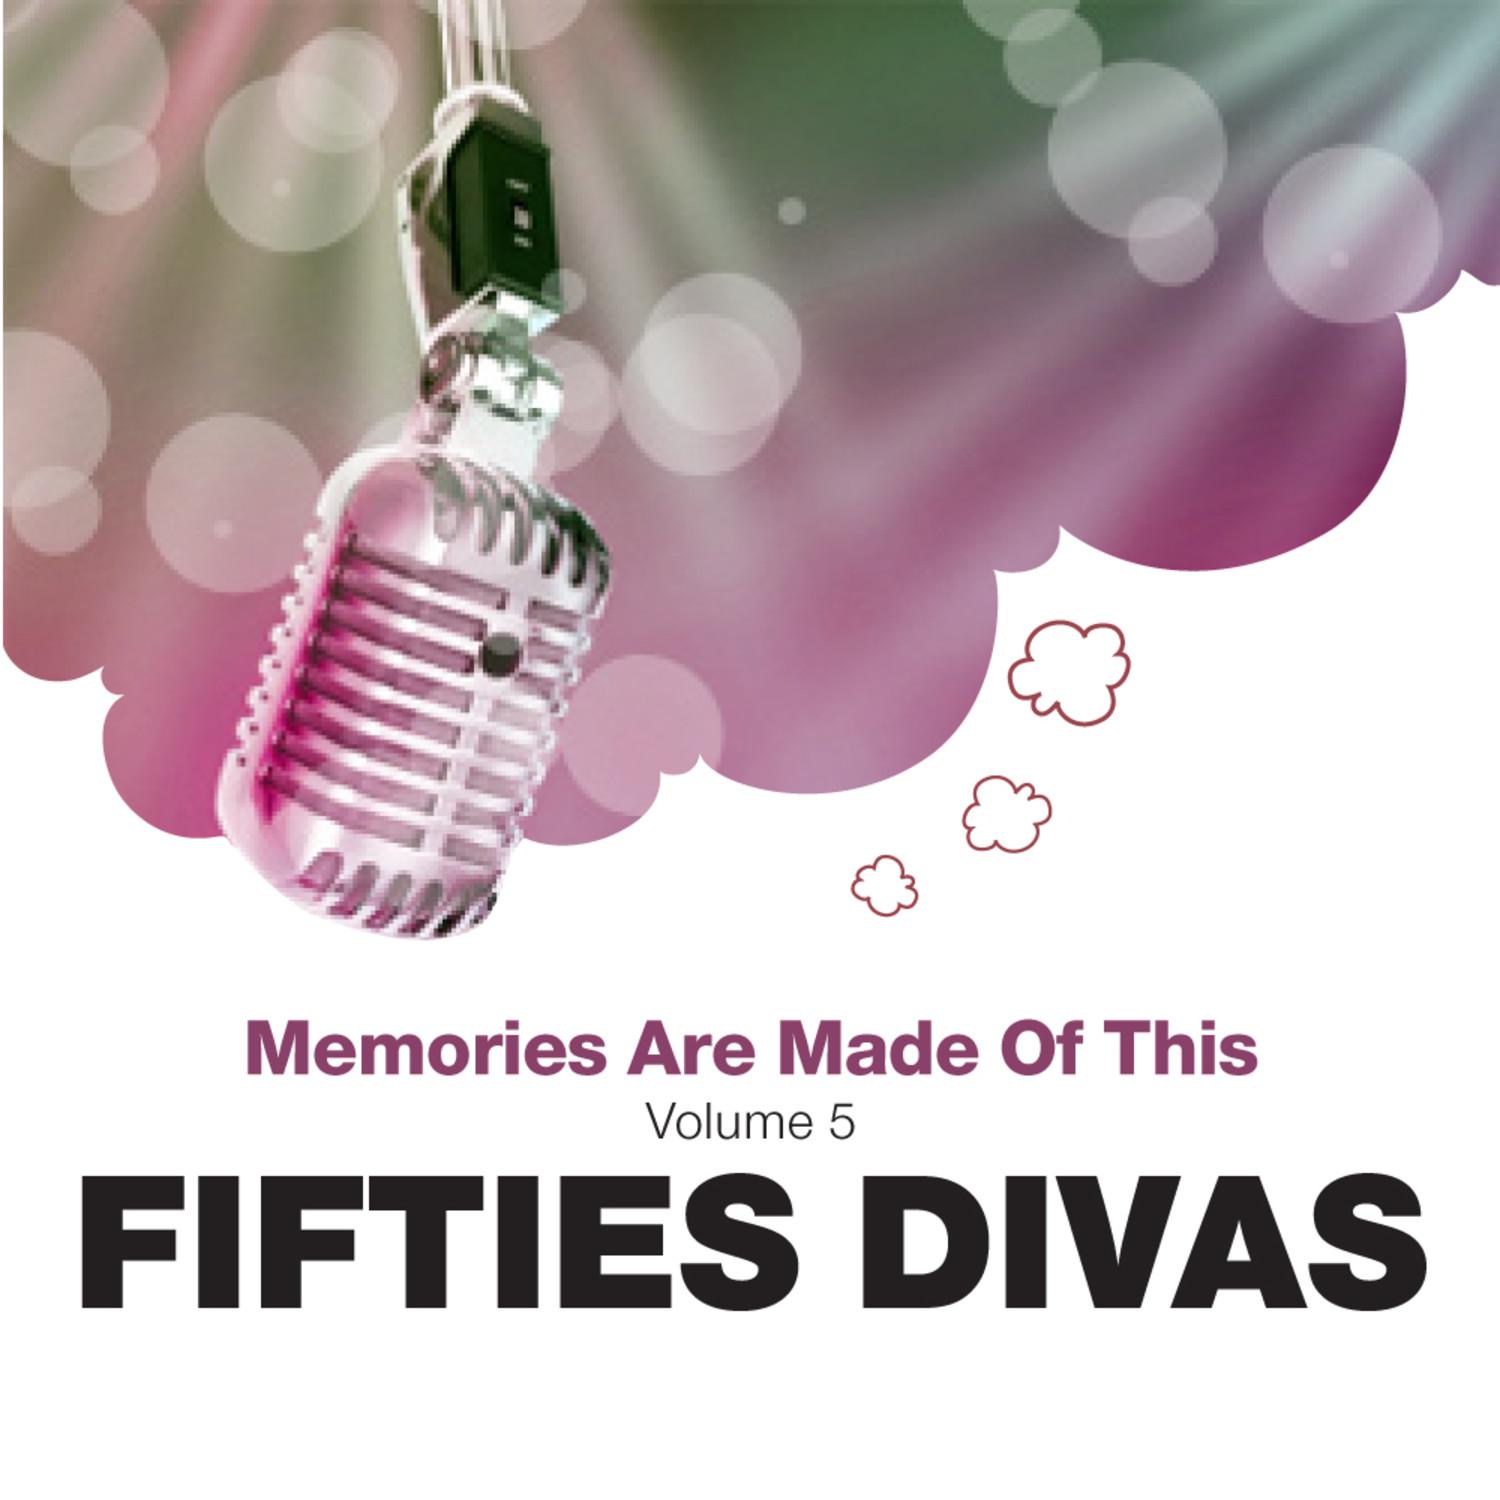 Memories Are Made Of This: Fifties Divas